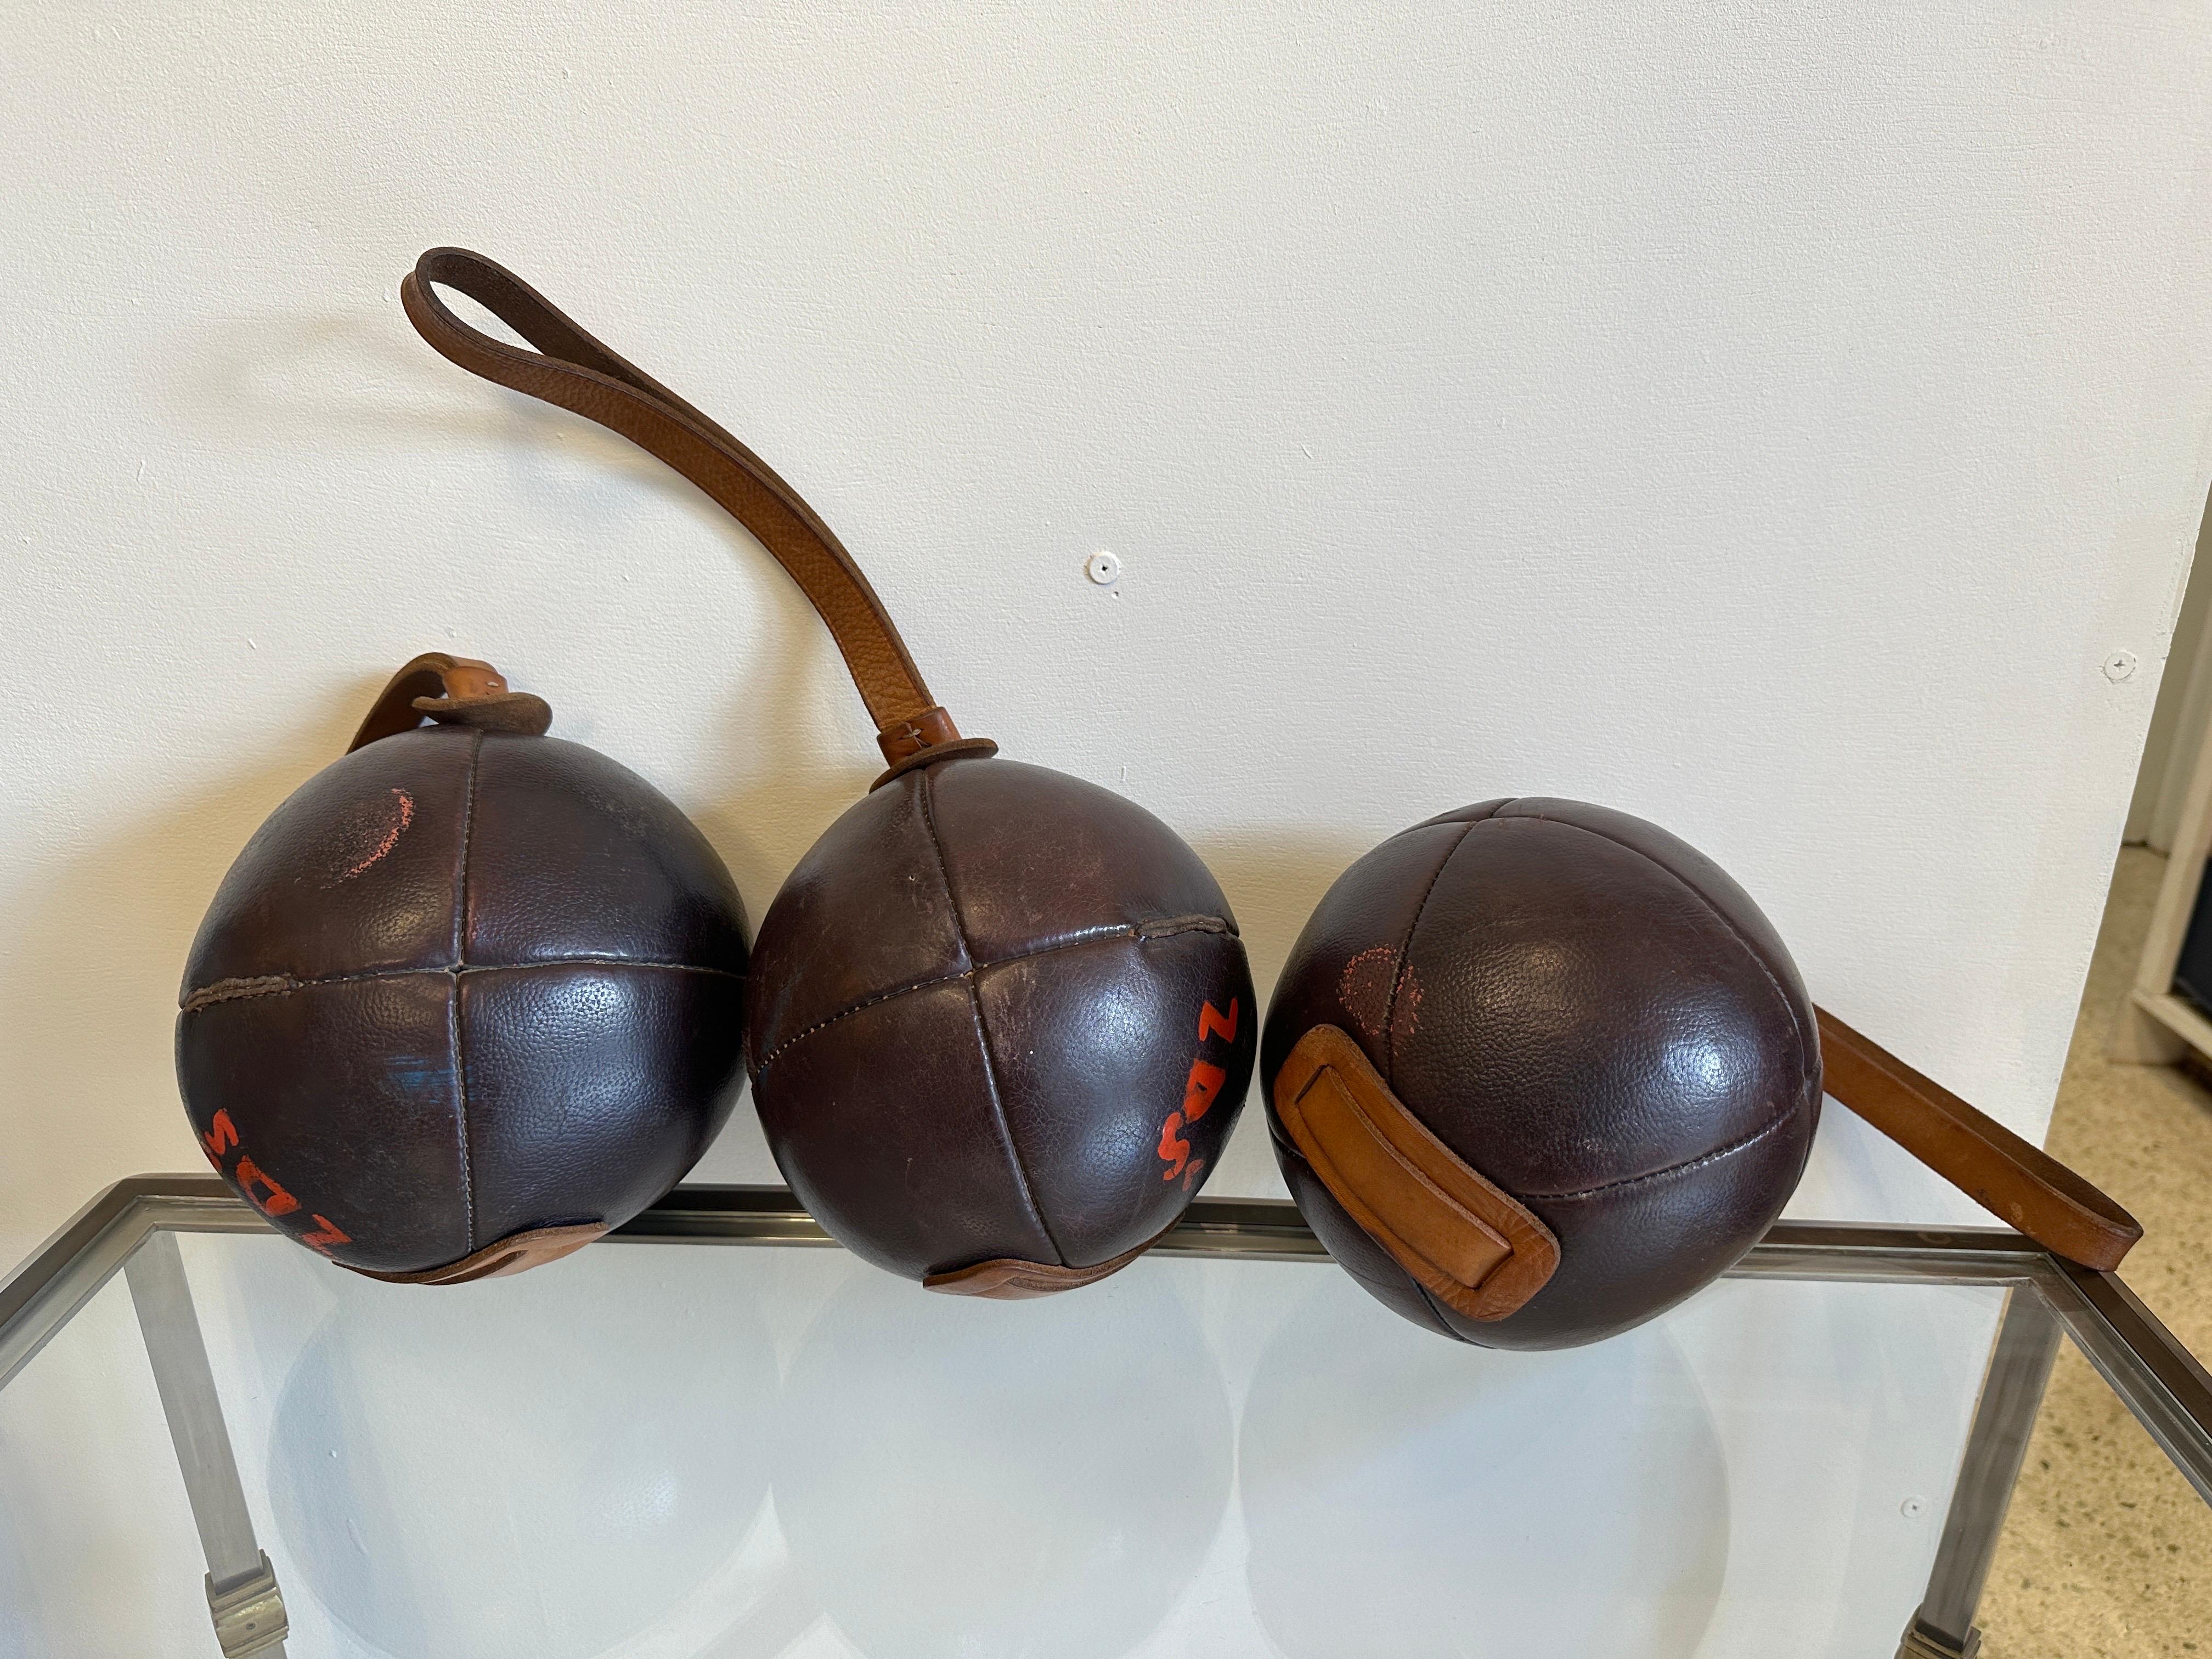 Whimsical leather ball weights (THREE AVAILABLE - sold individually) from France.  Saddle leather ball with strap for lifting. Good vintage condition. Wear to leather. Cool object for a home gym or office.

NOTE: Length from the top of the strap to